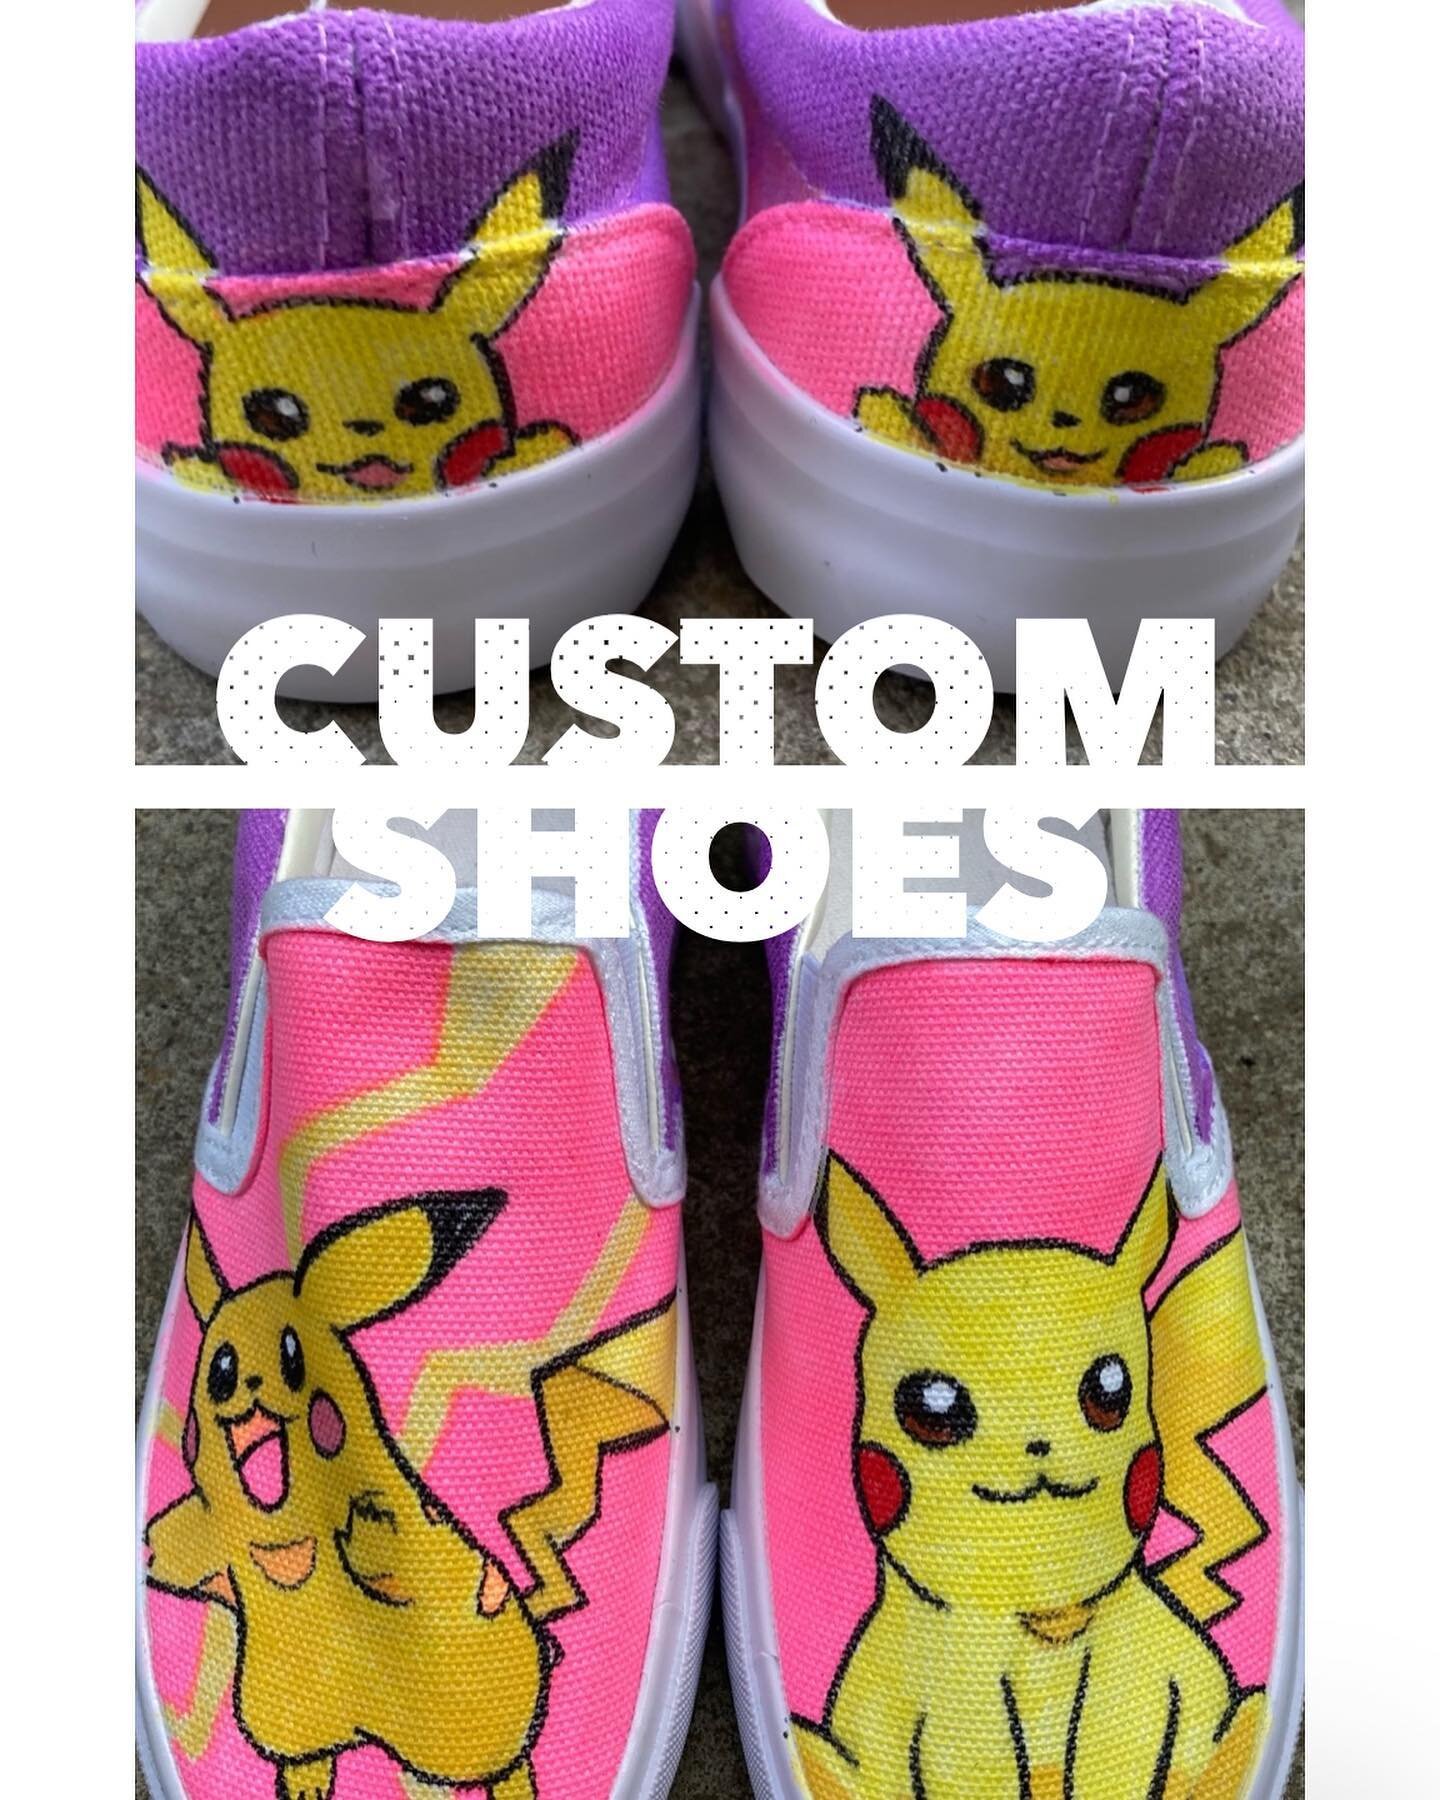 Custom shoes - Dm me for more info!
#custommade #customshoes #localartist #pikachu